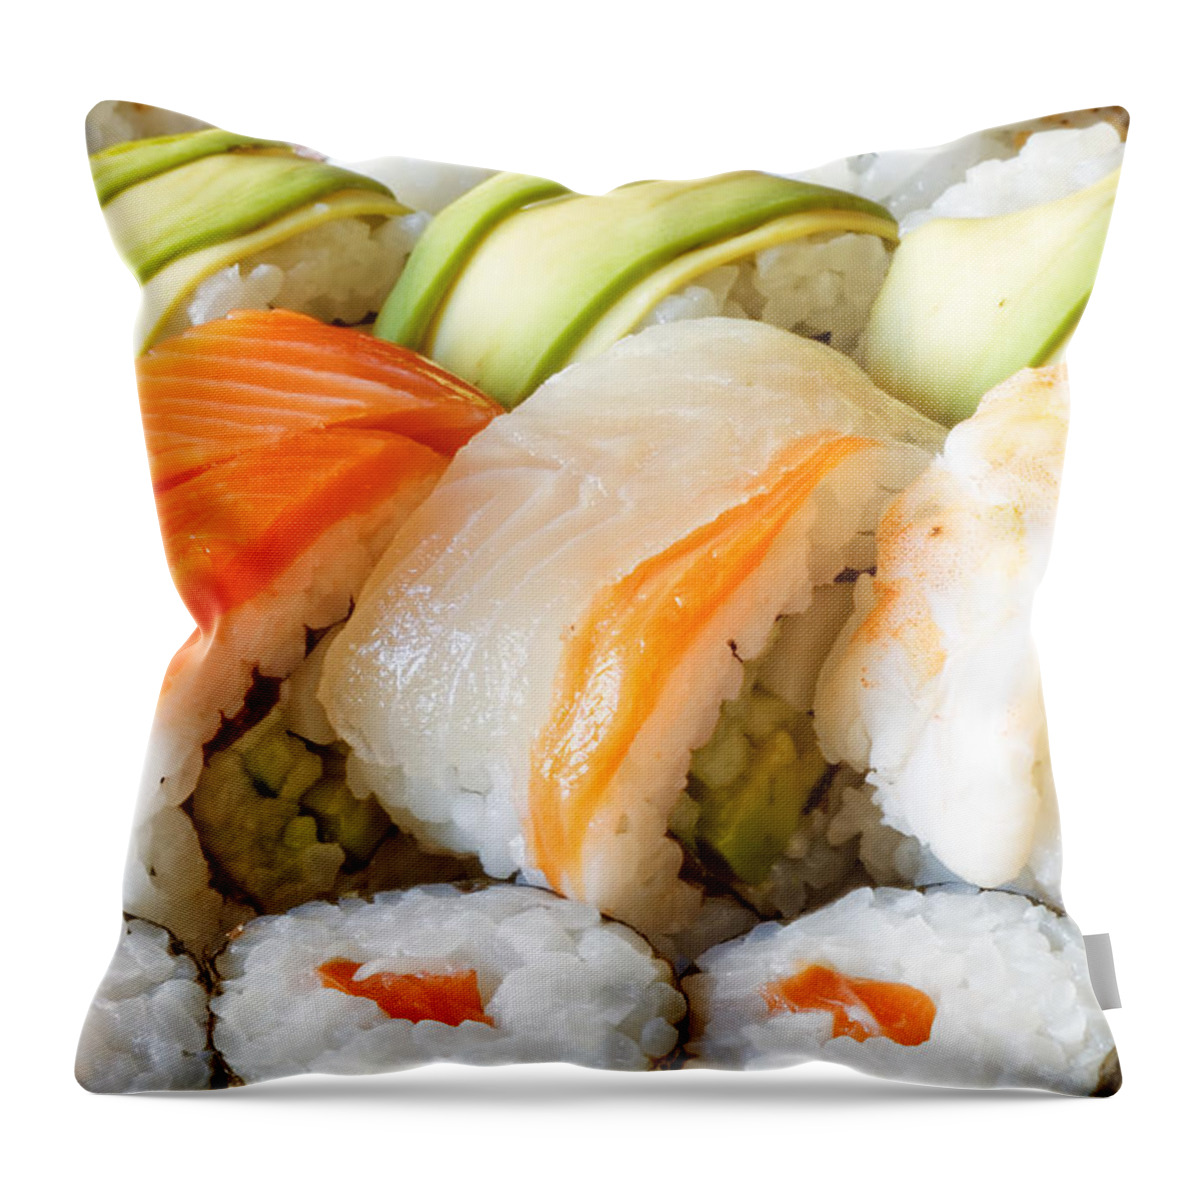 Appetizer Throw Pillow featuring the photograph Sushi by Peter Lakomy